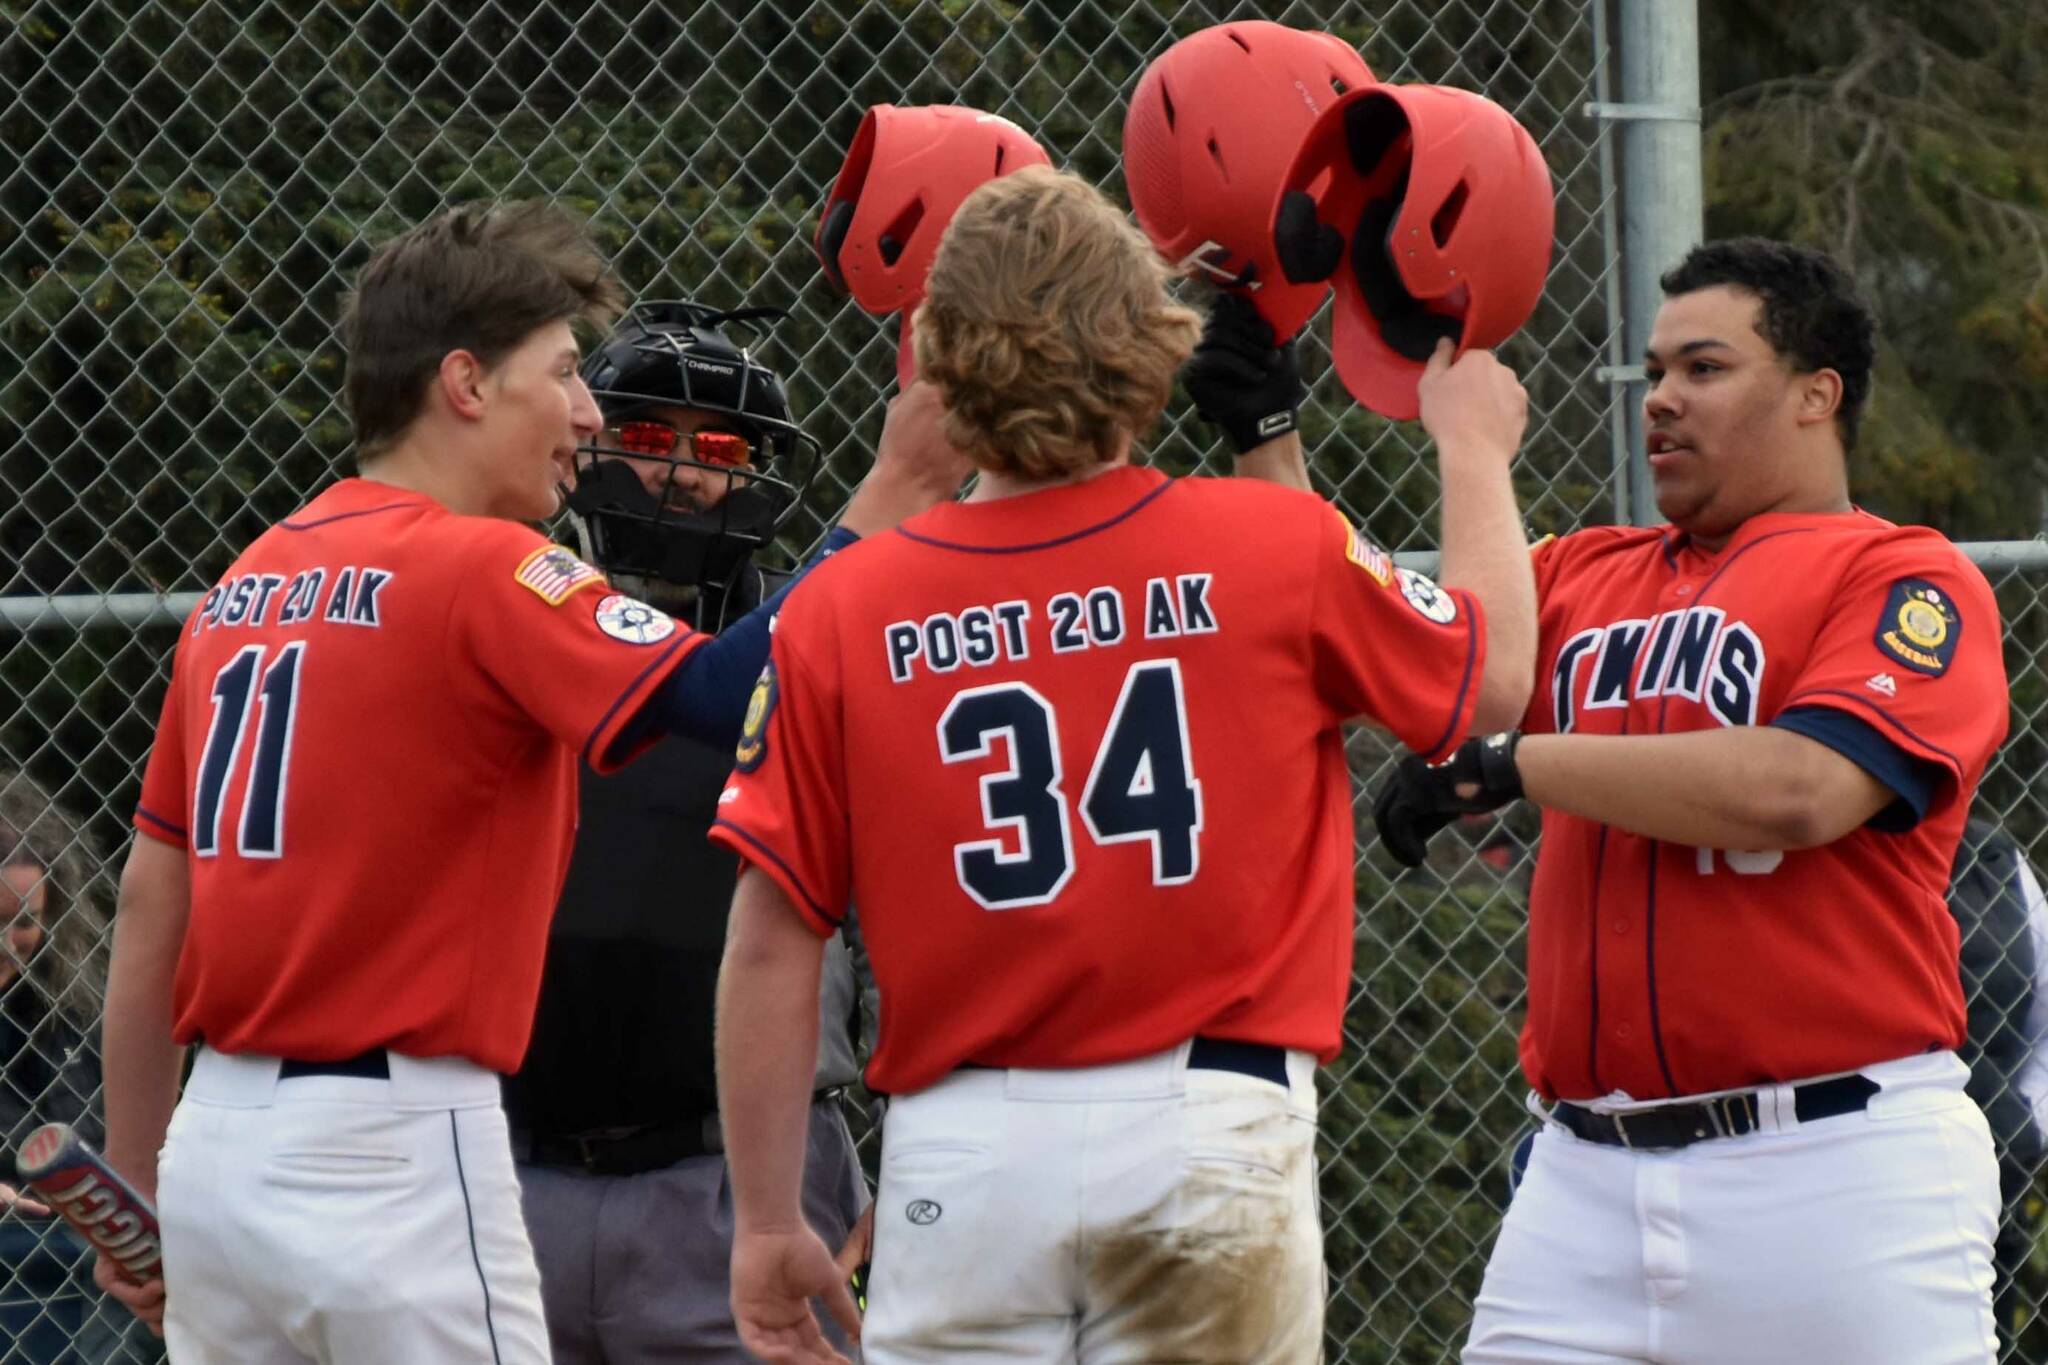 Atticus Gibson (right) of the American Legion Twins is congratulated on a three-run home run by Braden Smith and Charlie Chamberlain on Sunday, June 11, 2023, at the Soldotna Little League fields in Soldotna, Alaska. (Photo by Jeff Helminiak/Peninsula Clarion)